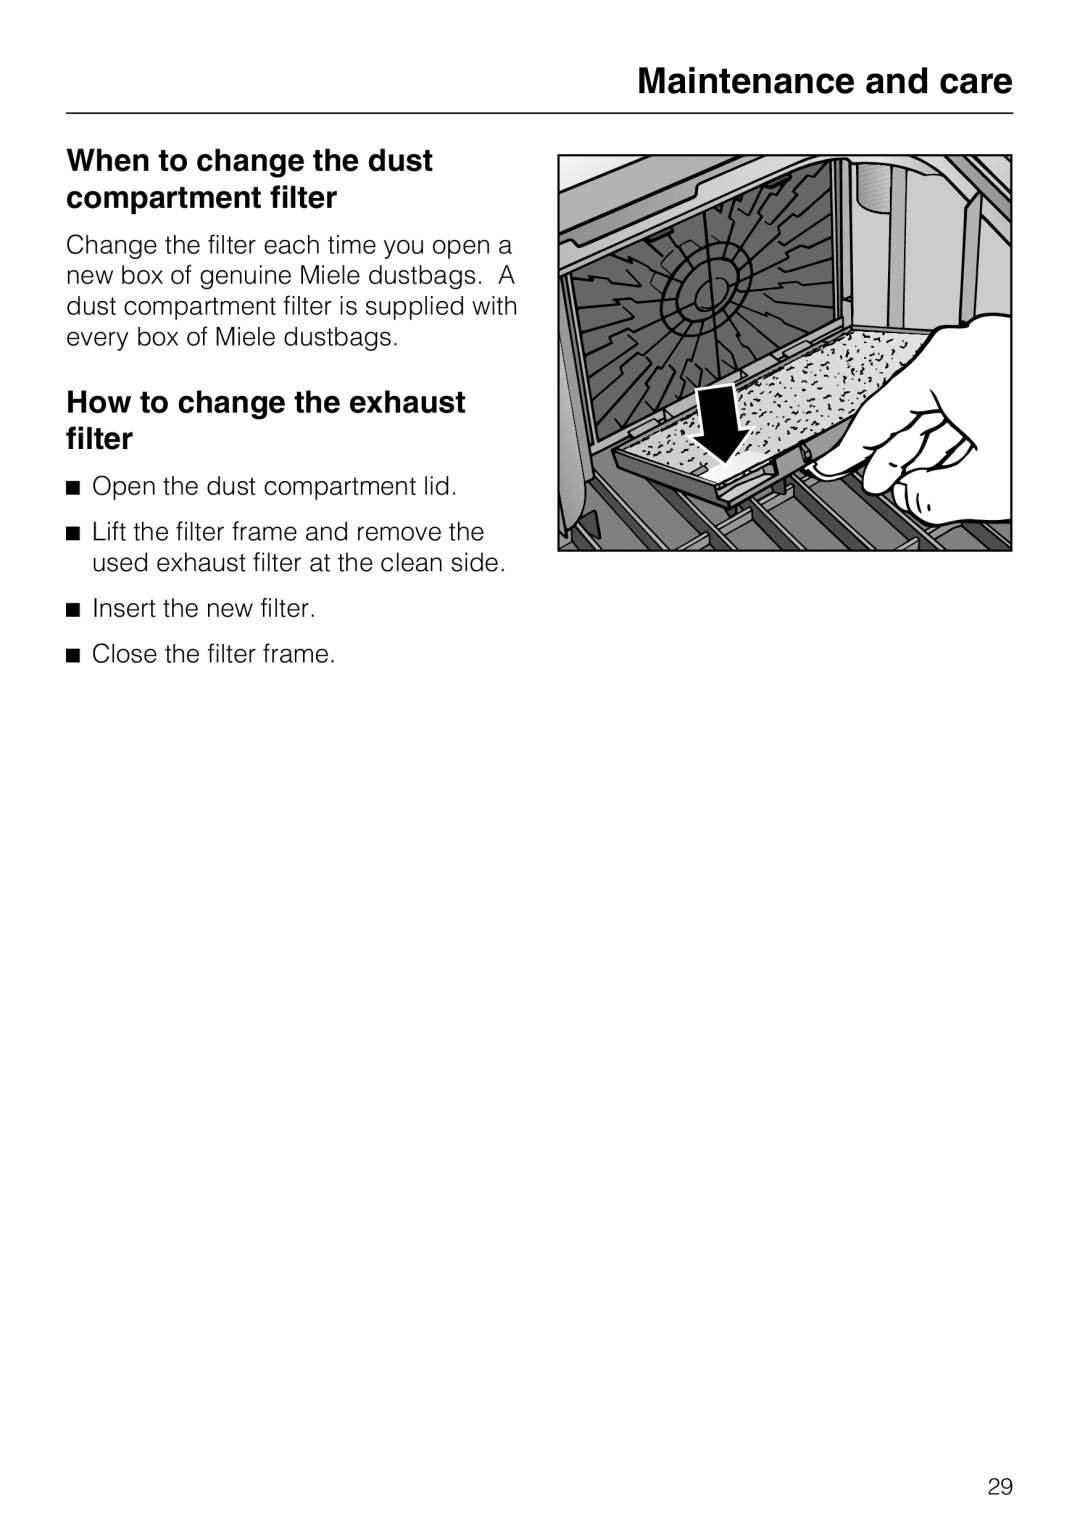 Miele S 5981 manual When to change the dust compartment filter, How to change the exhaust filter, Maintenance and care 